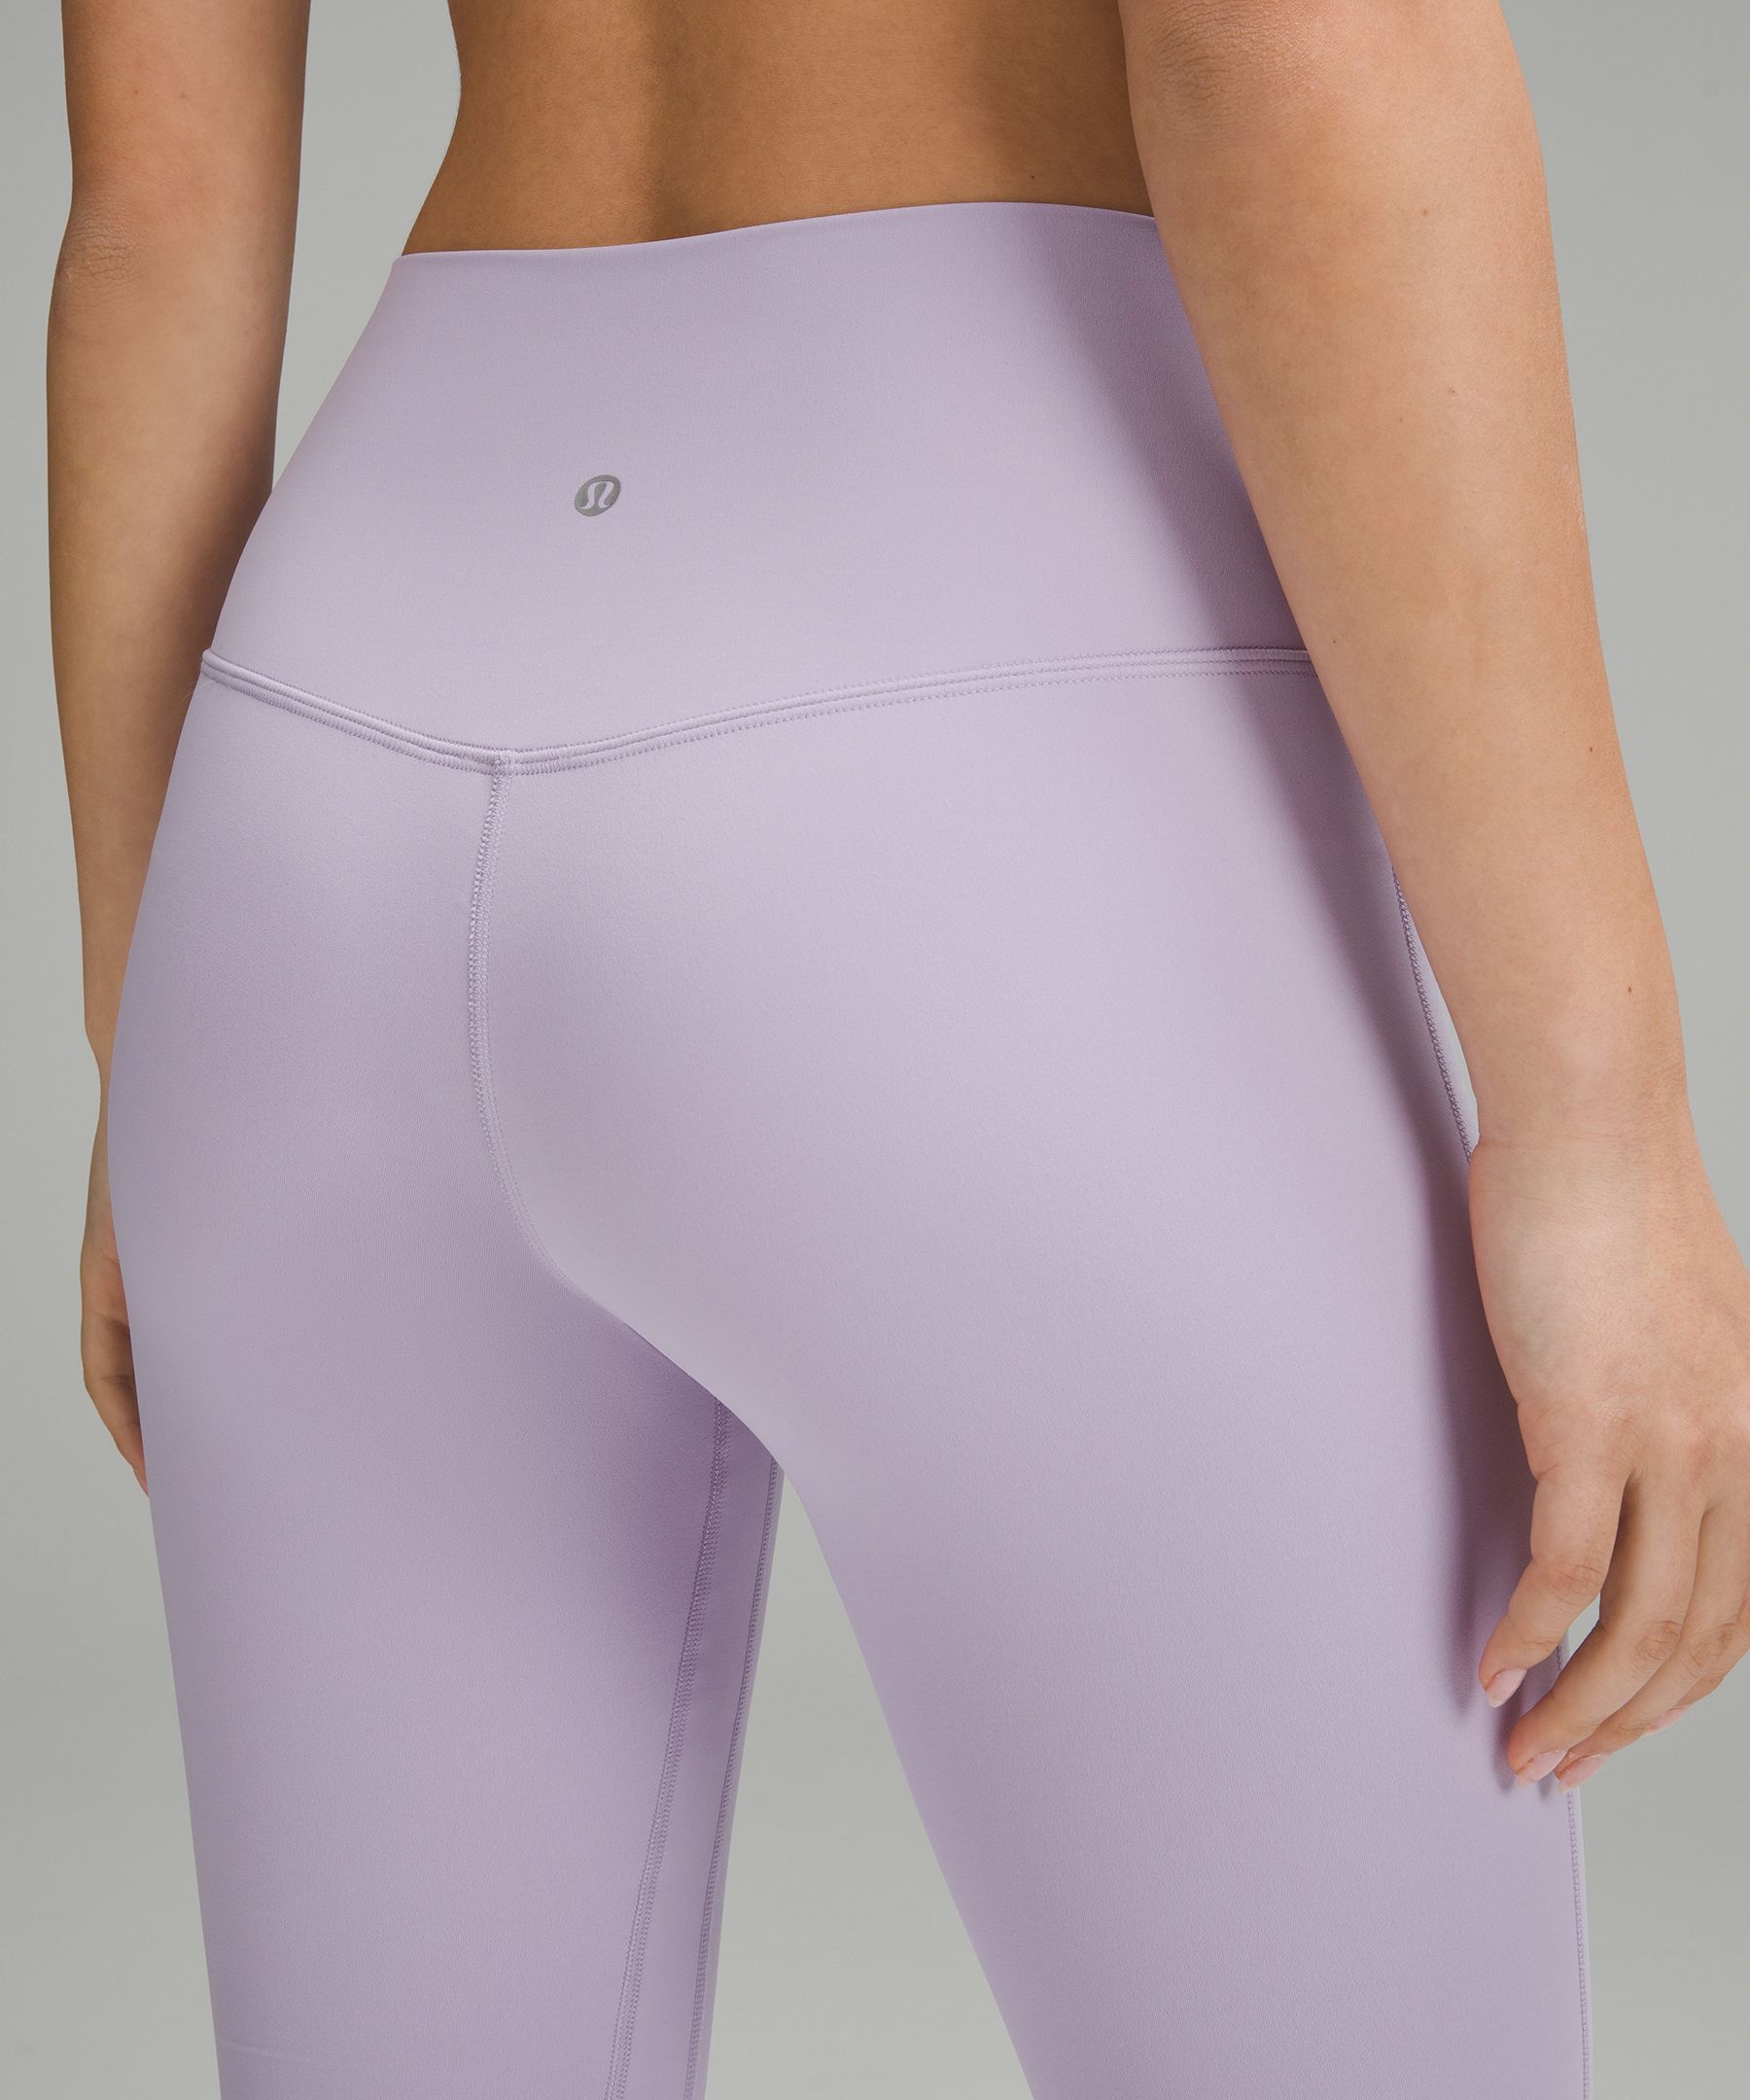 Lululemon Leggings Size 8 - $67 New With Tags - From Jaden